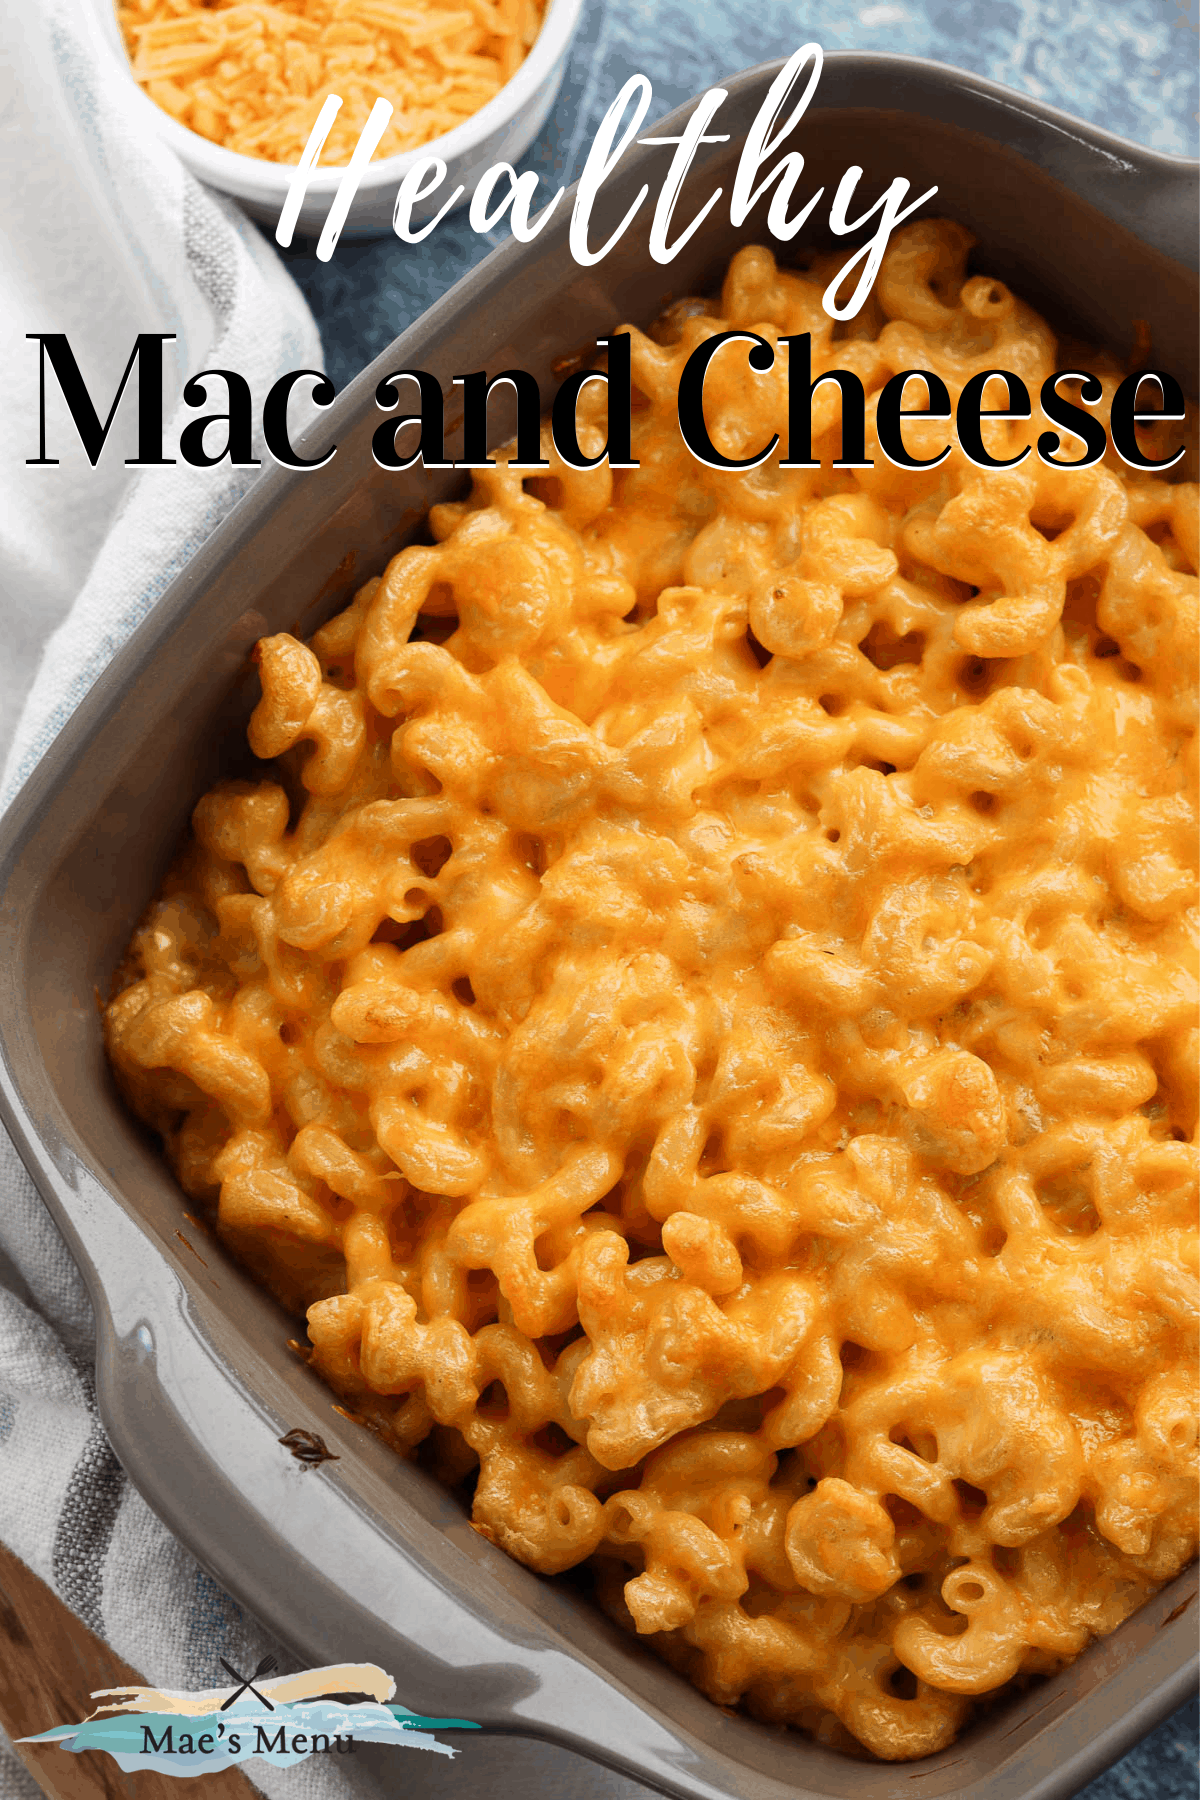 okay google we need mac and cheese lunch holders for kids